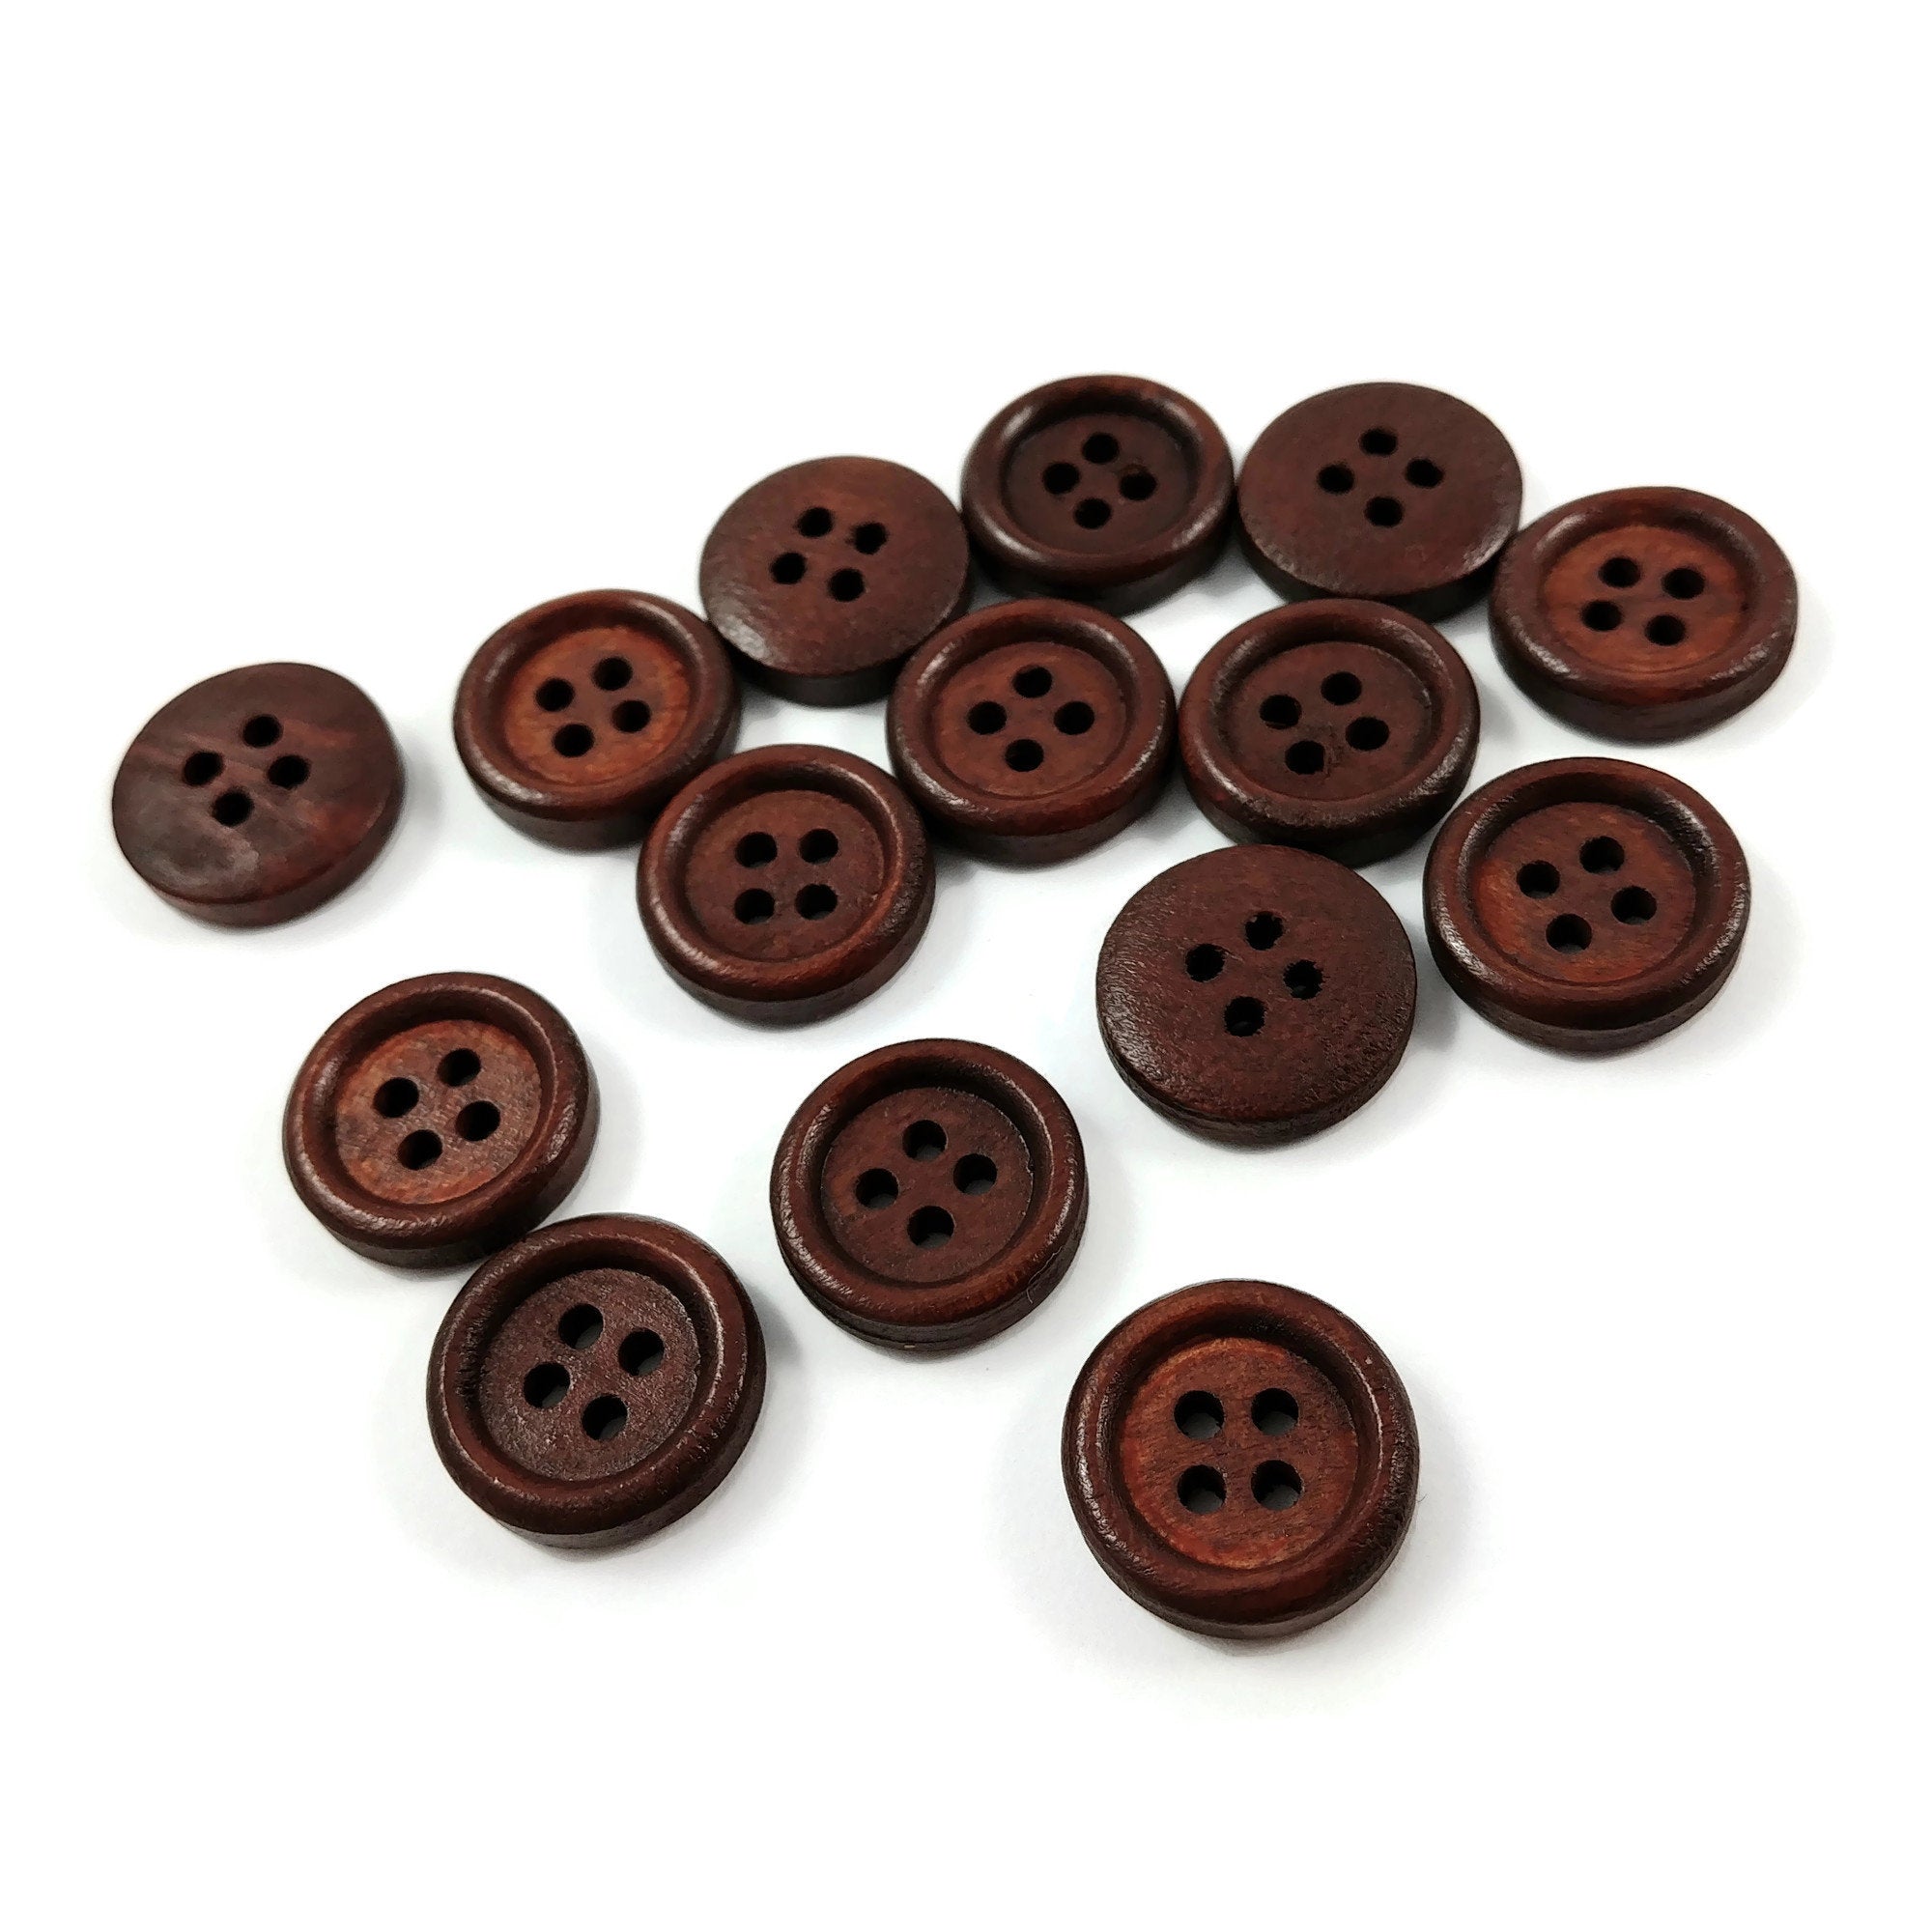 Kangyijia Assorted Round Wood Wooden Buttons Black Brown Beige 4 Hole Mixed Sewing Art DIY Craft Supplies Kits with Box 118pcs